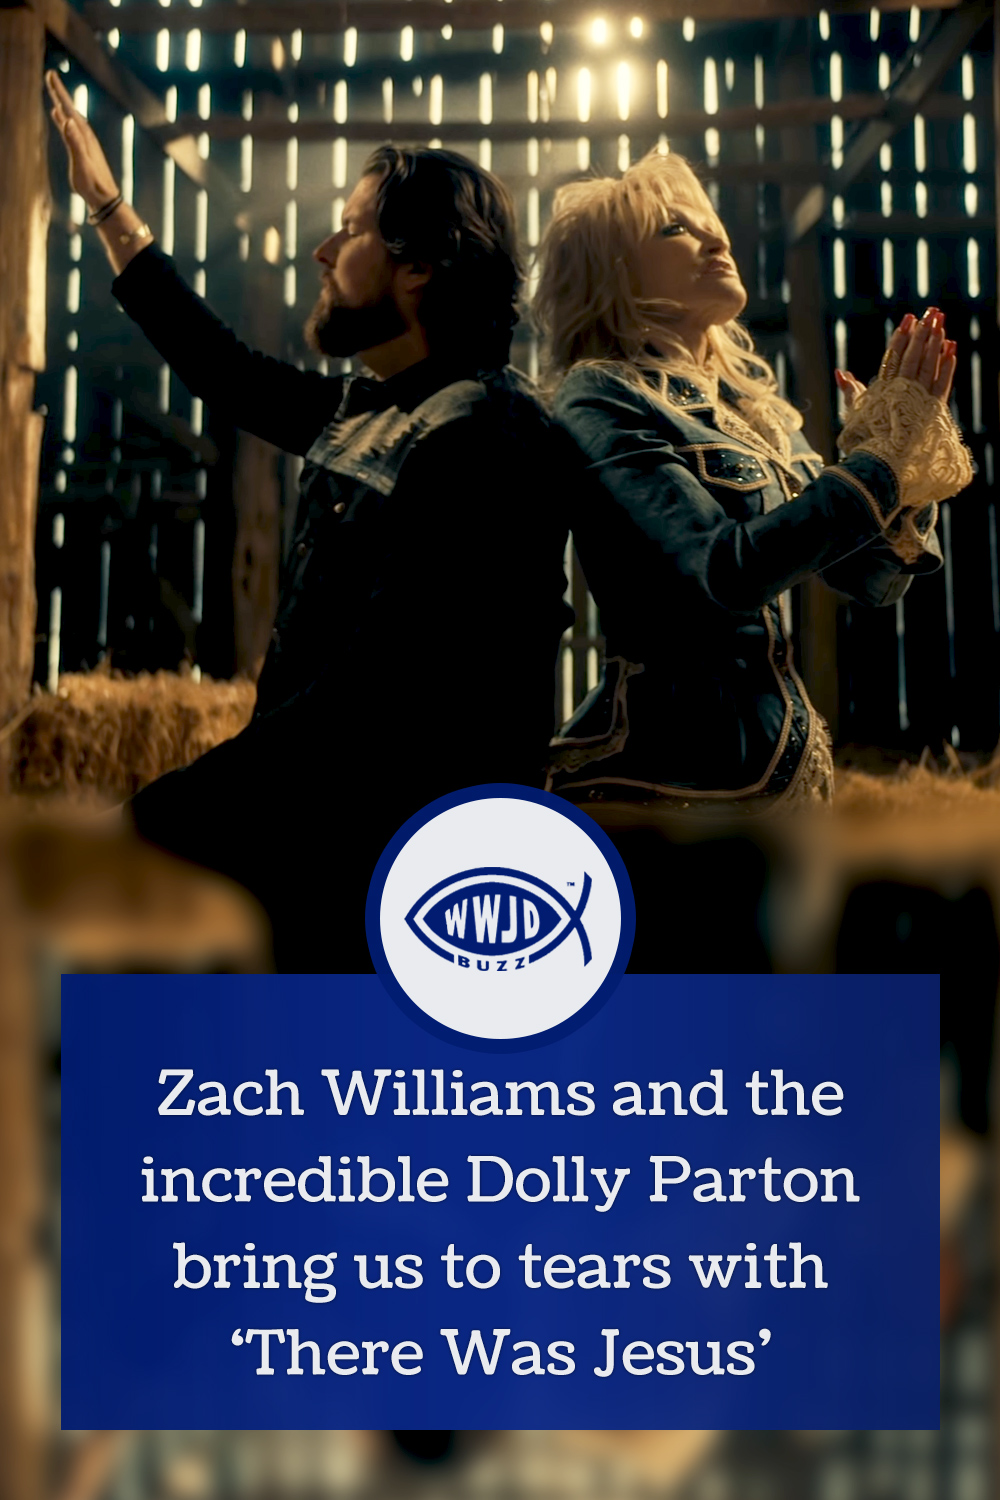 Zach Williams and the incredible Dolly Parton bring us to tears with ‘There Was Jesus’